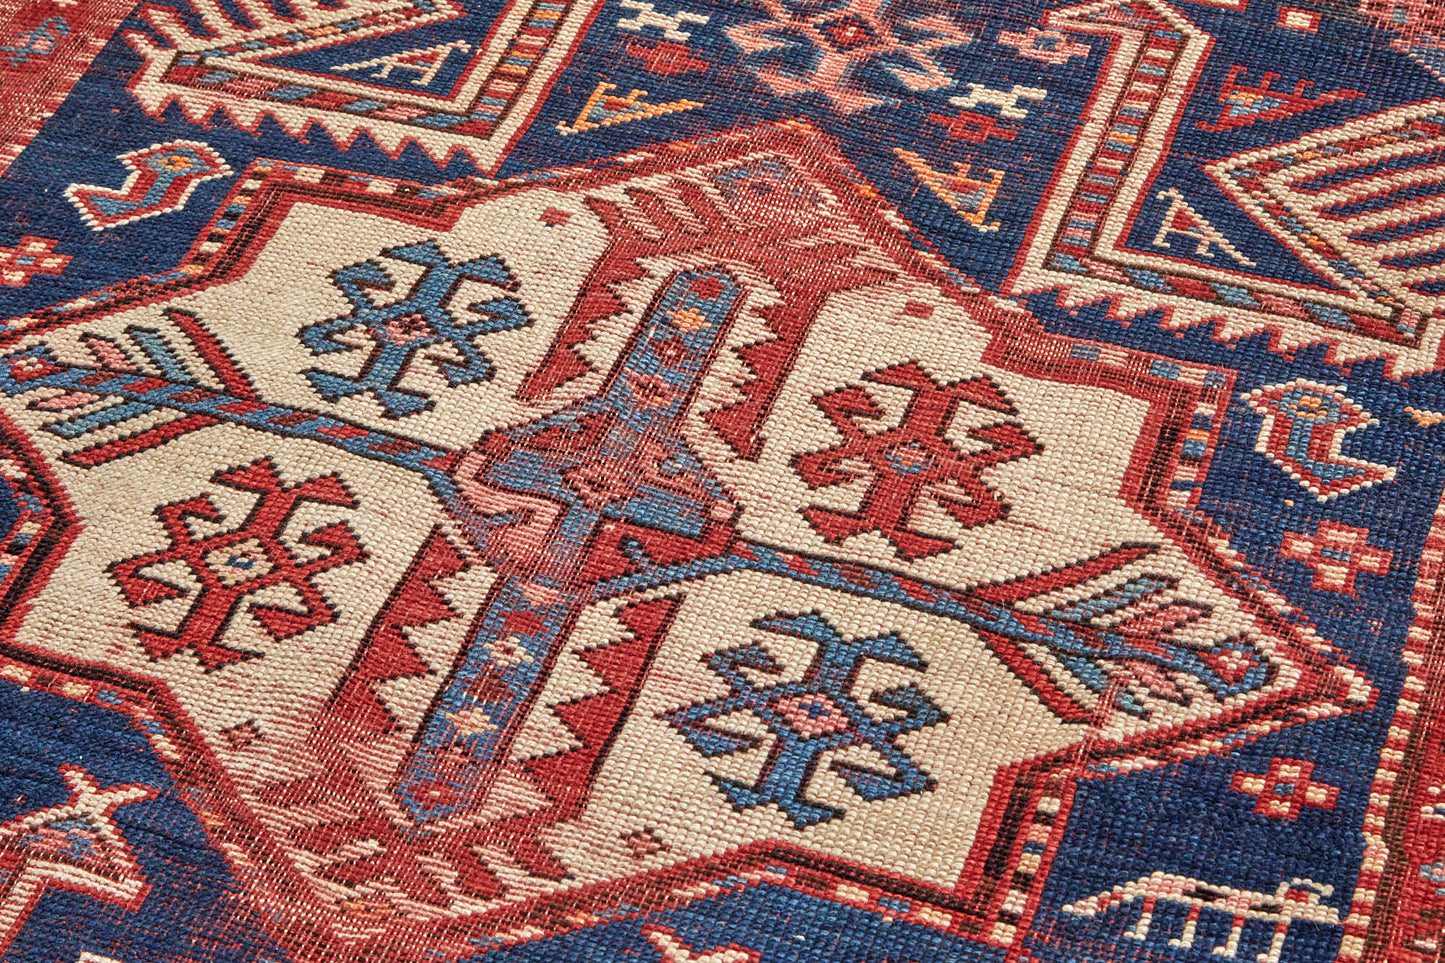 Antique hand woven Akstafa Persian Rug Runner - red, blue and cream with four medallions and bird shapes throughout - Available from King Kennedy Rugs Los Angeles 